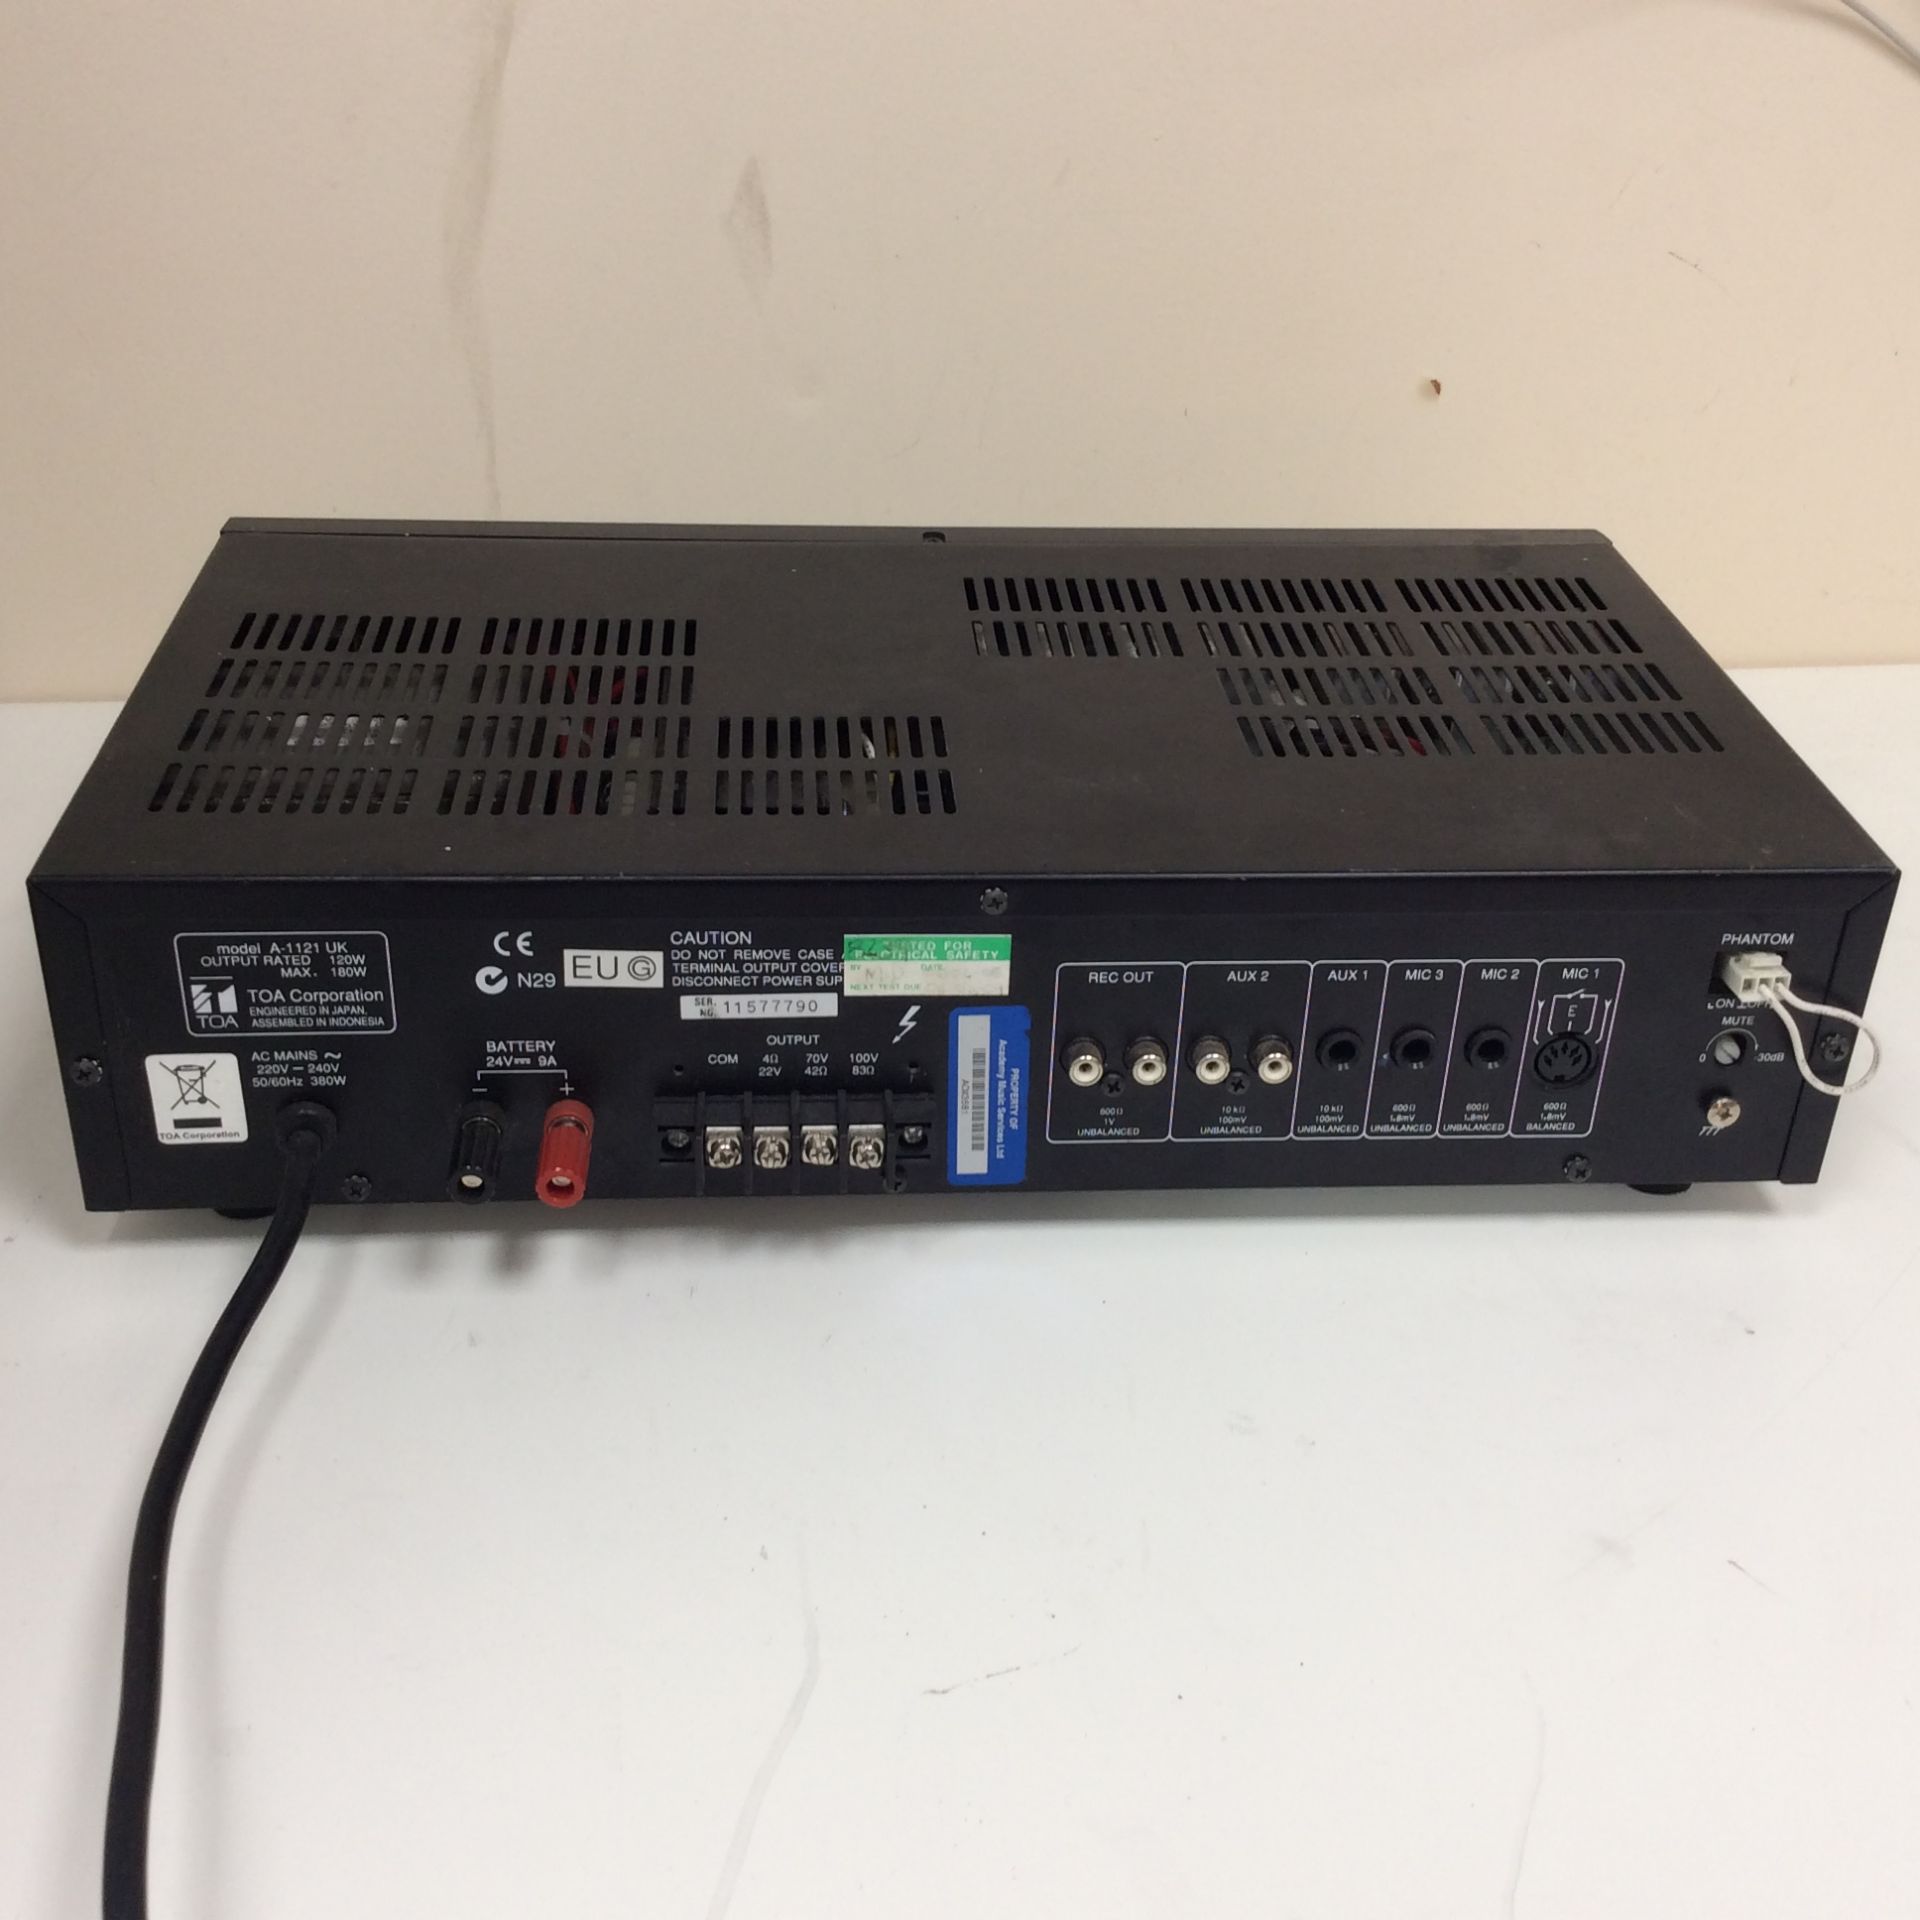 Toa a-1121 pa amplifier - Image 5 of 5